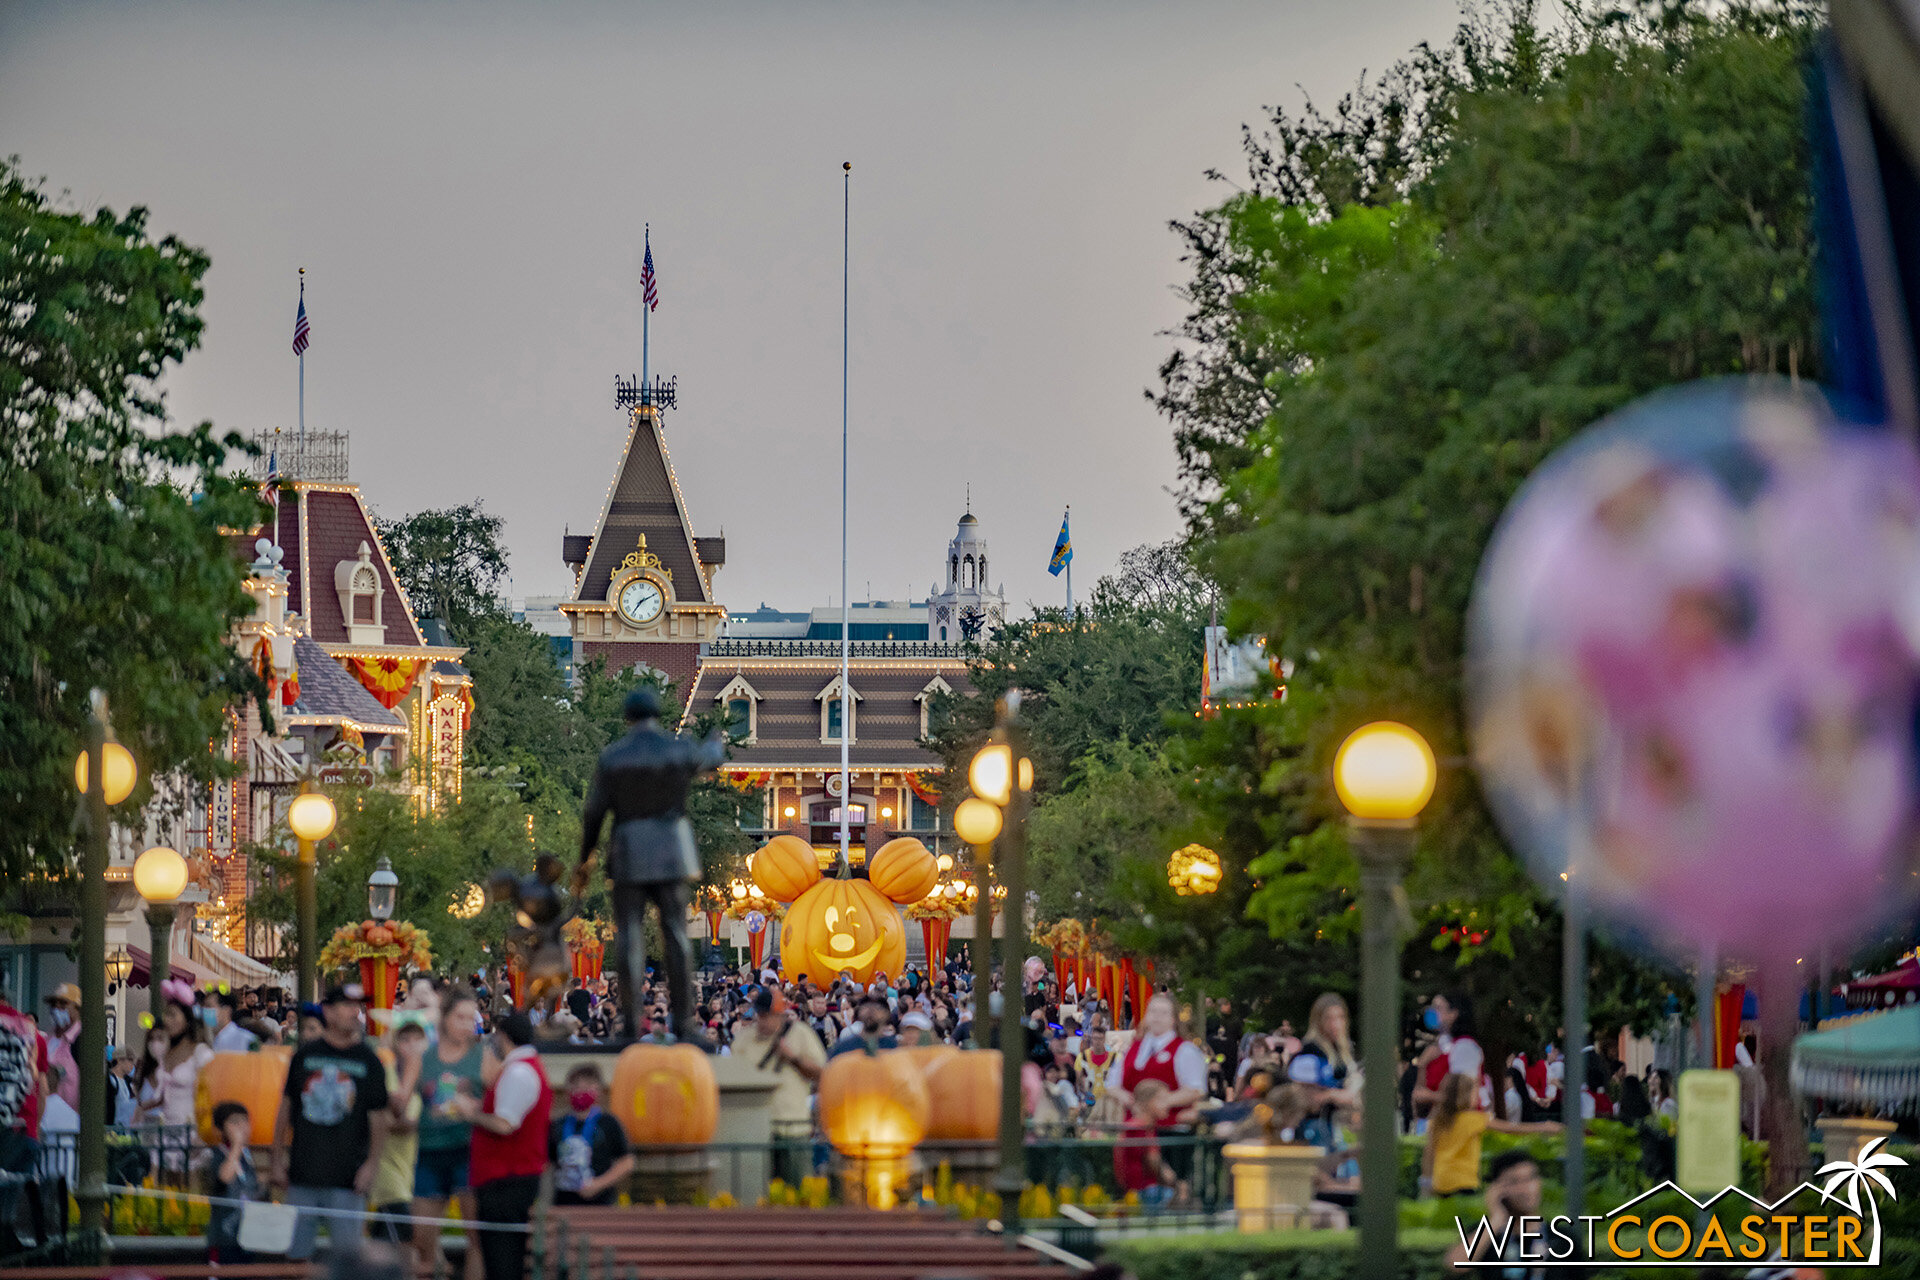  Although the evenings have been busier, crowds at Disneyland have still been very manageable and generally below normal, even after the Magic Keys annual pass program have gone on sale! 